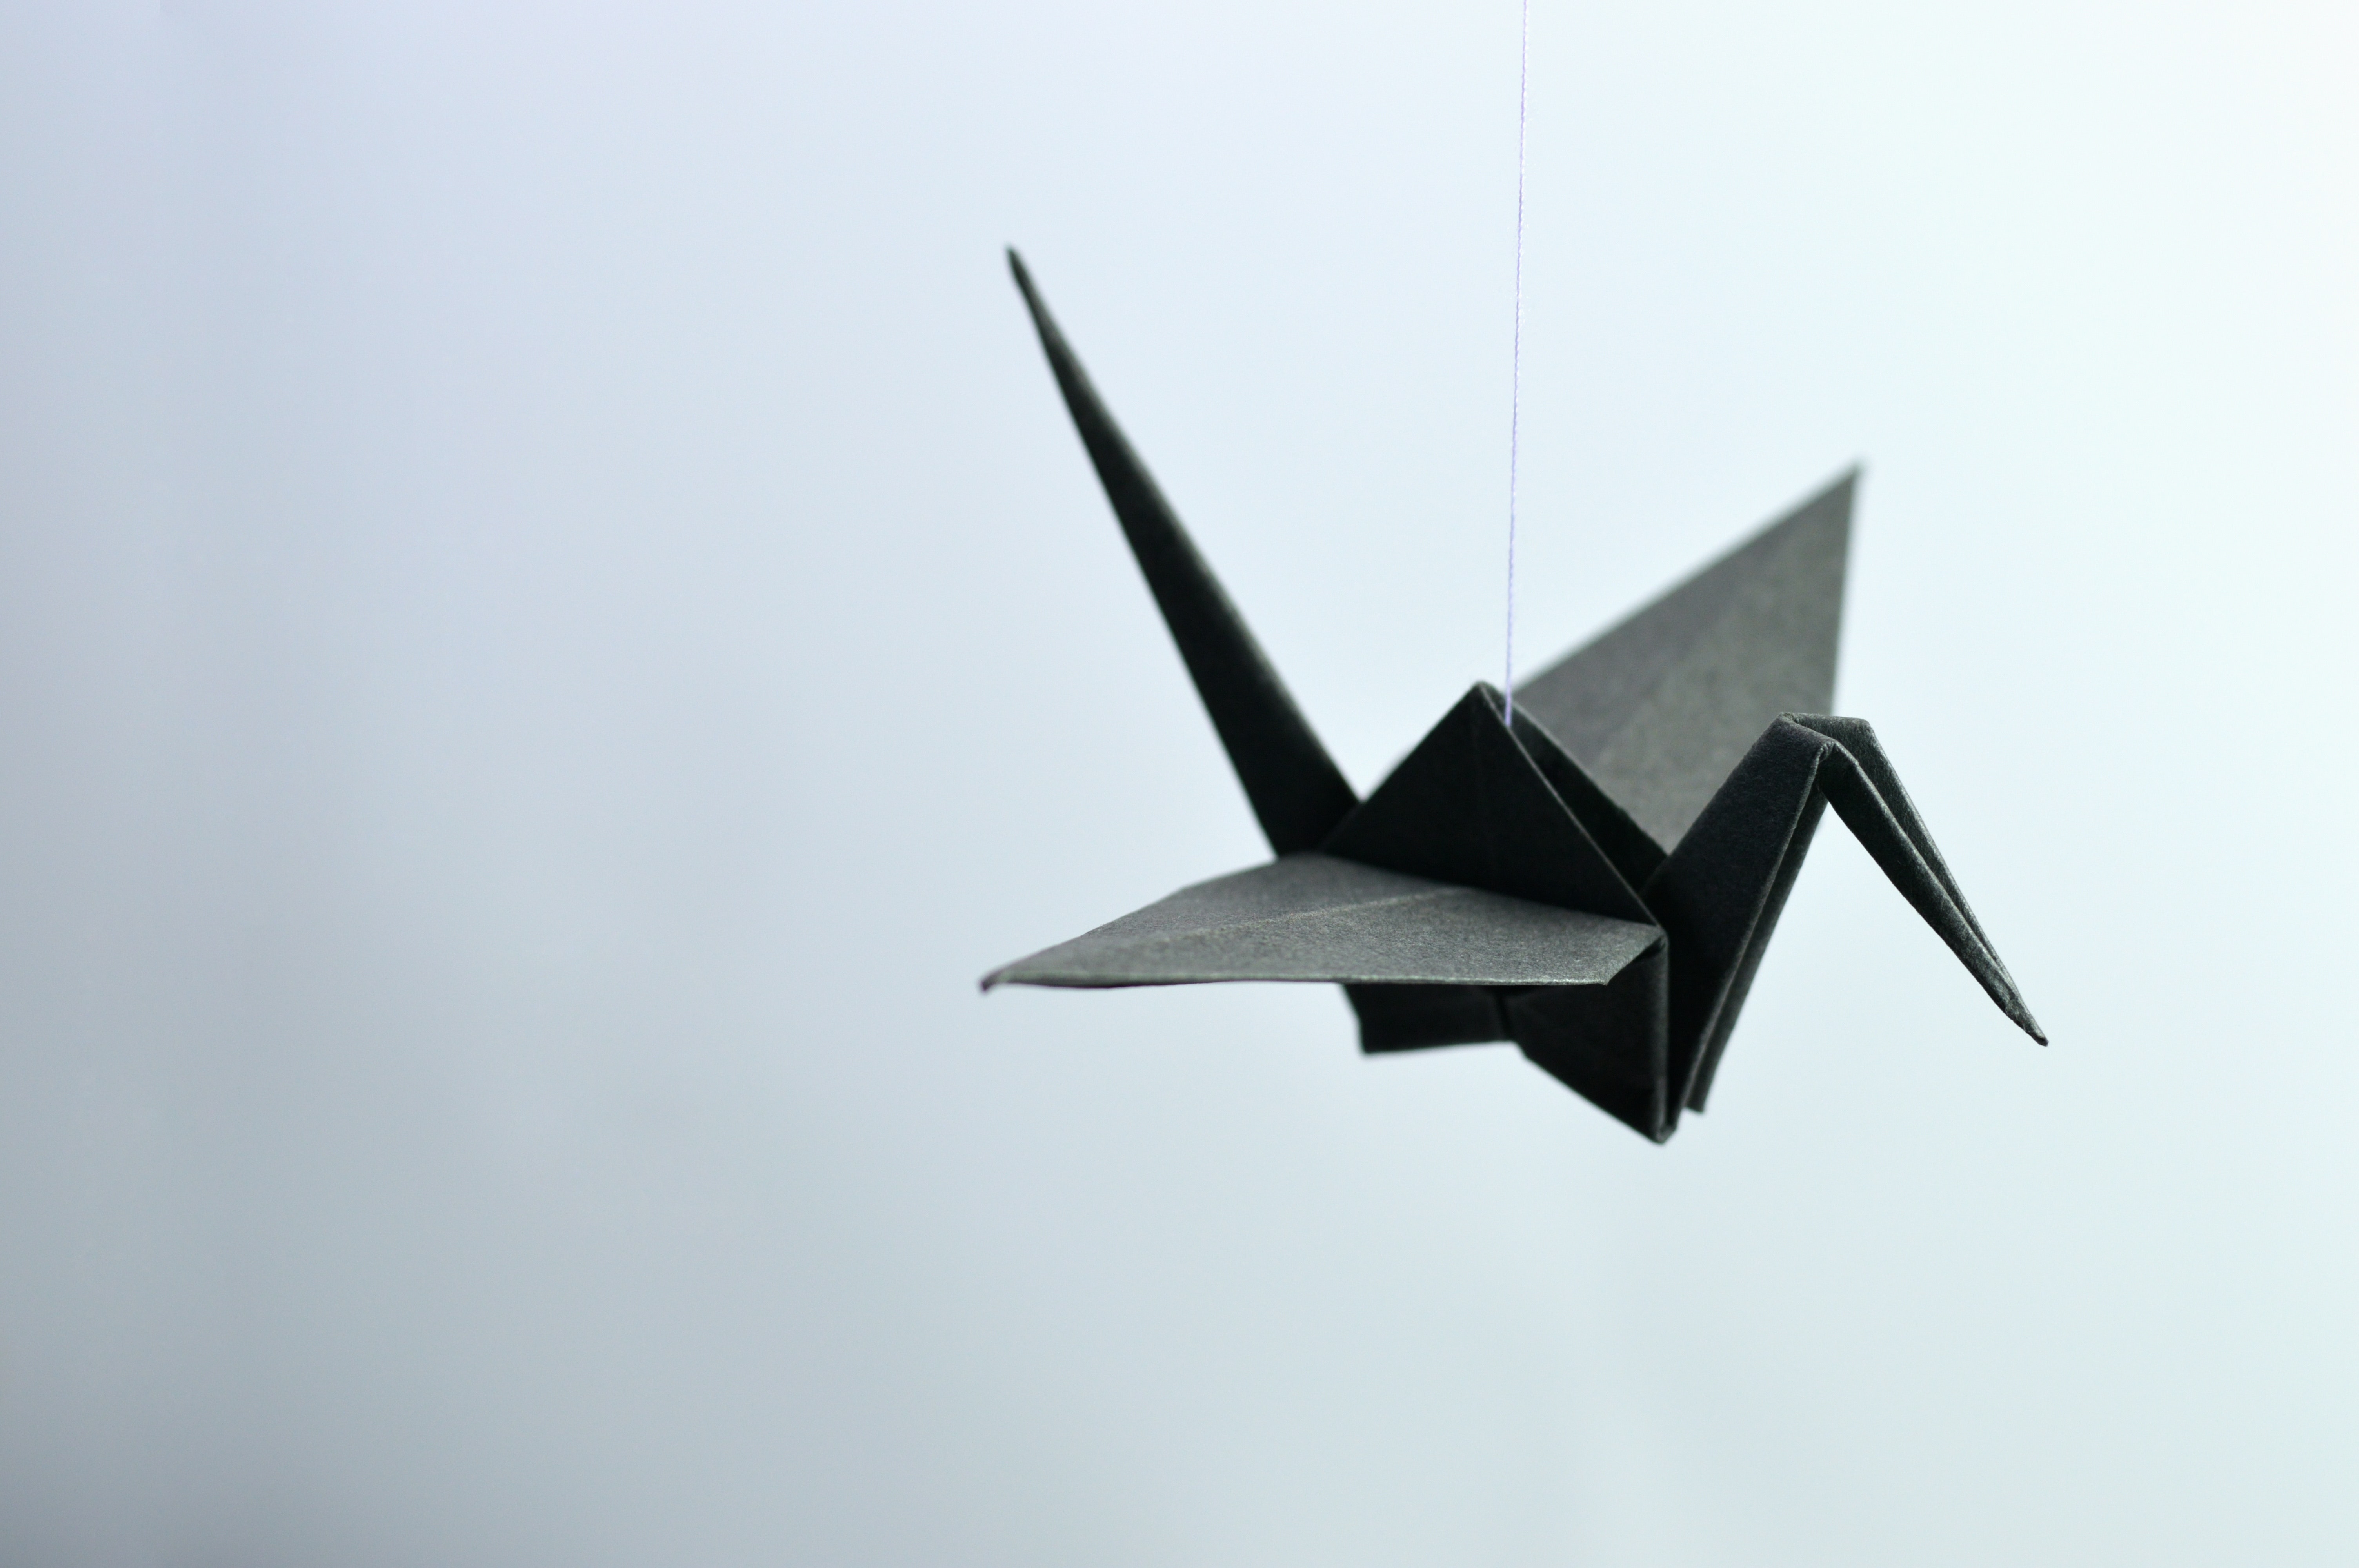 Shallow Focus Photography Of Paper Crane · Free Stock Photo